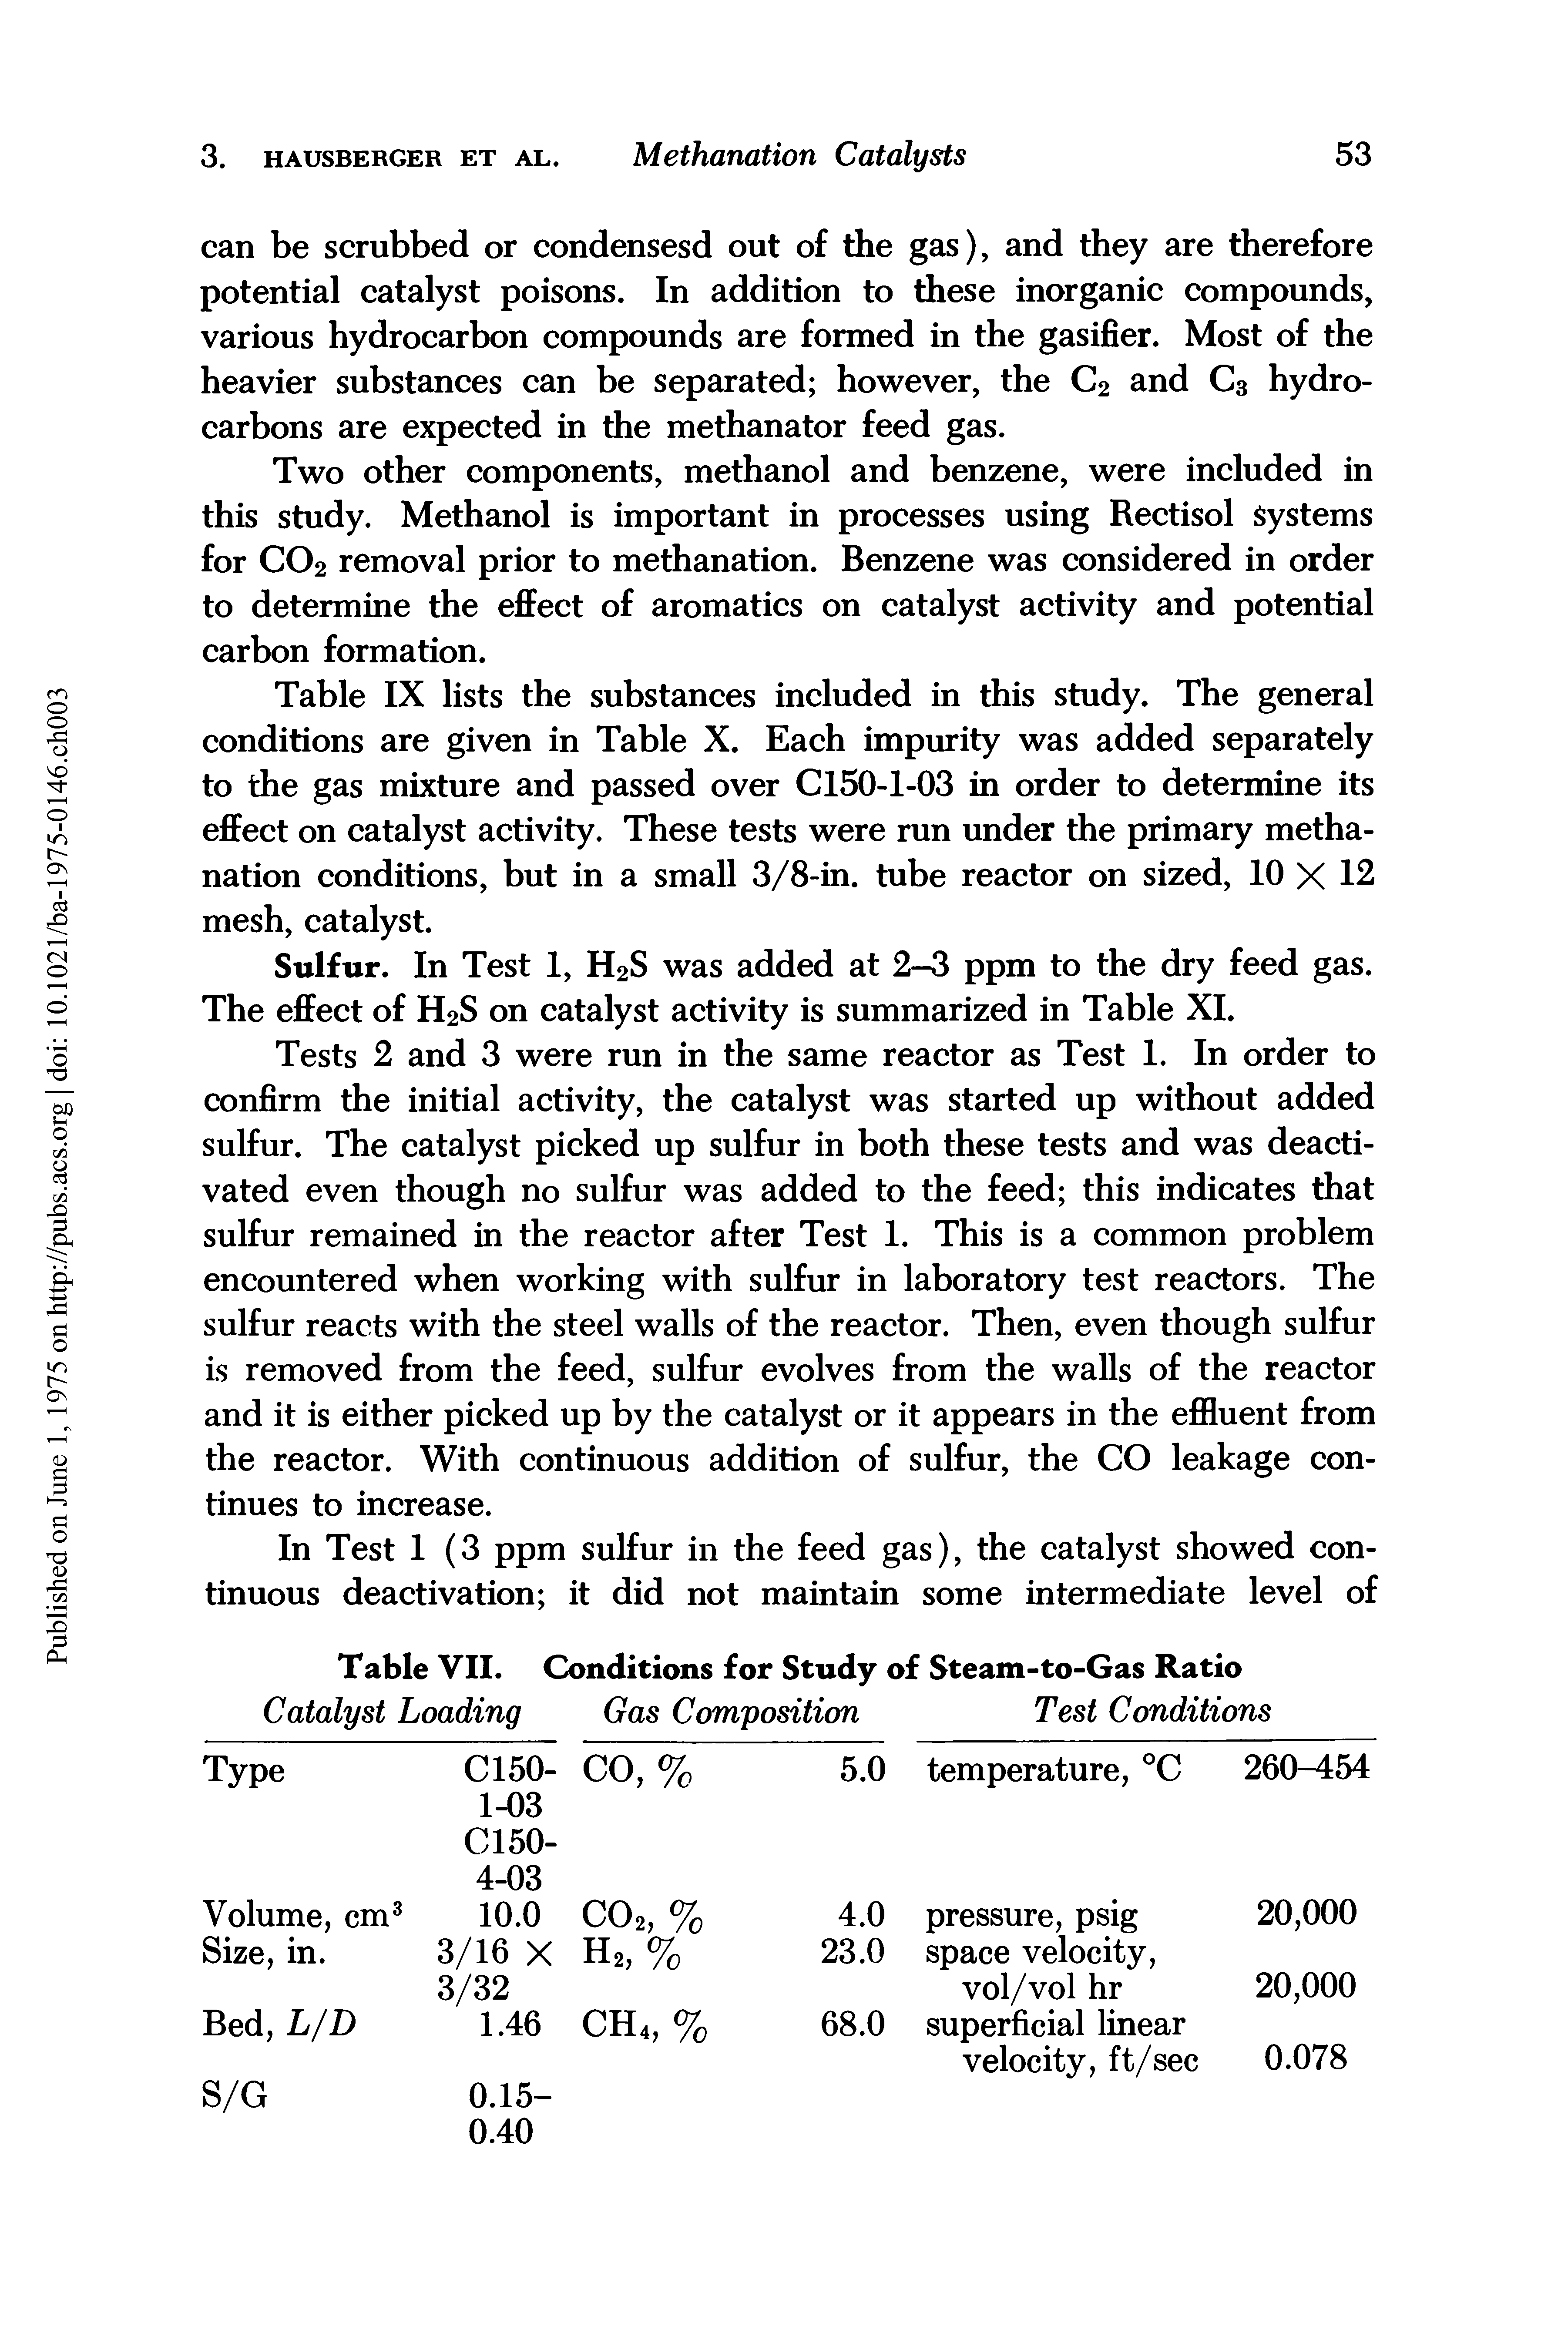 Table IX lists the substances included in this study. The general conditions are given in Table X. Each impurity was added separately to the gas mixture and passed over C150-1-03 in order to determine its effect on catalyst activity. These tests were run under the primary methanation conditions, but in a small 3/8-in. tube reactor on sized, 10 X 12 mesh, catalyst.